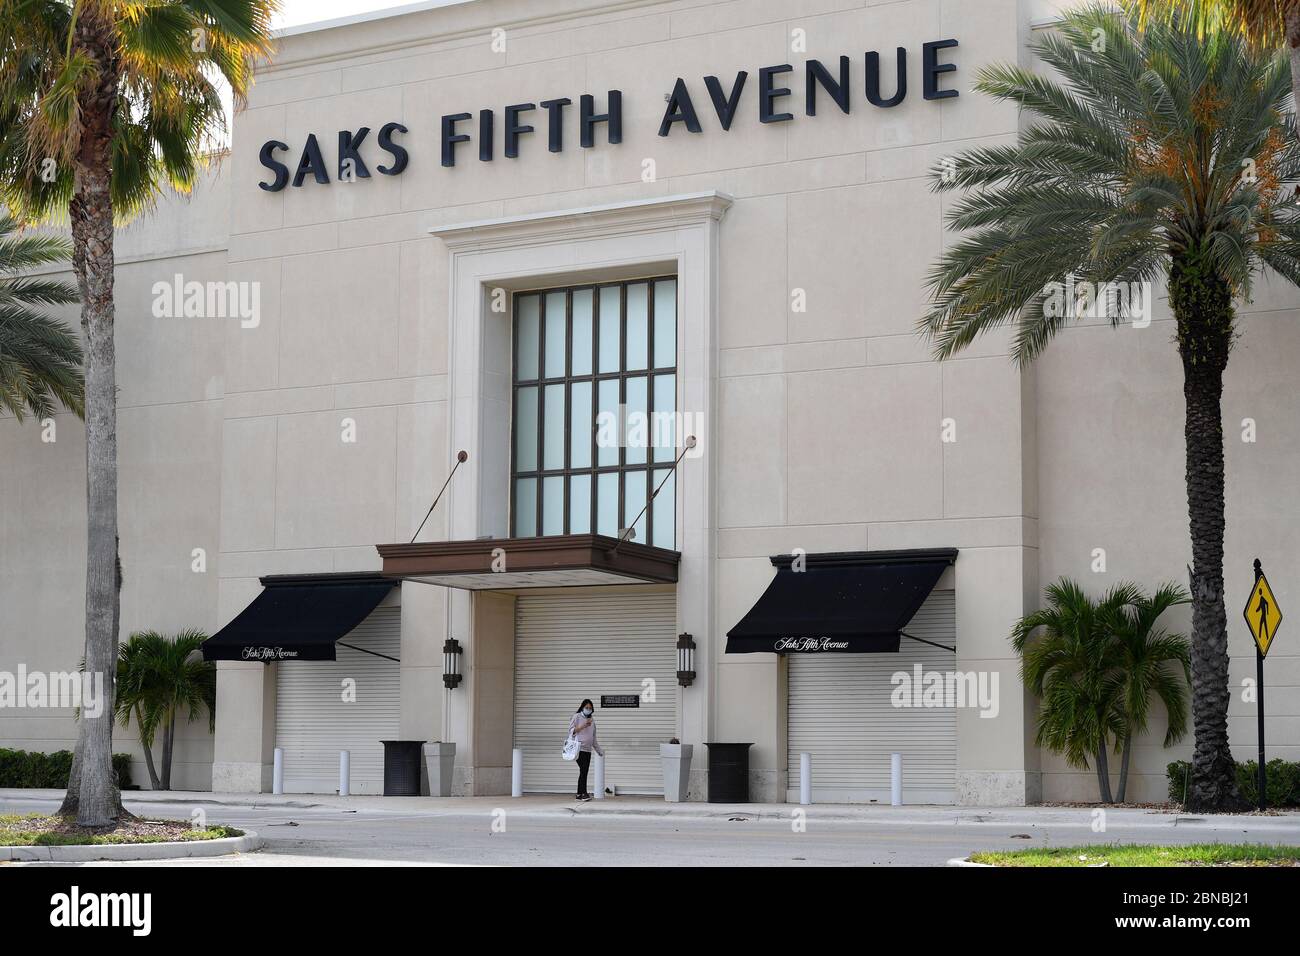 Town Center Mall at Boca Raton Opens with a Long List of Safety